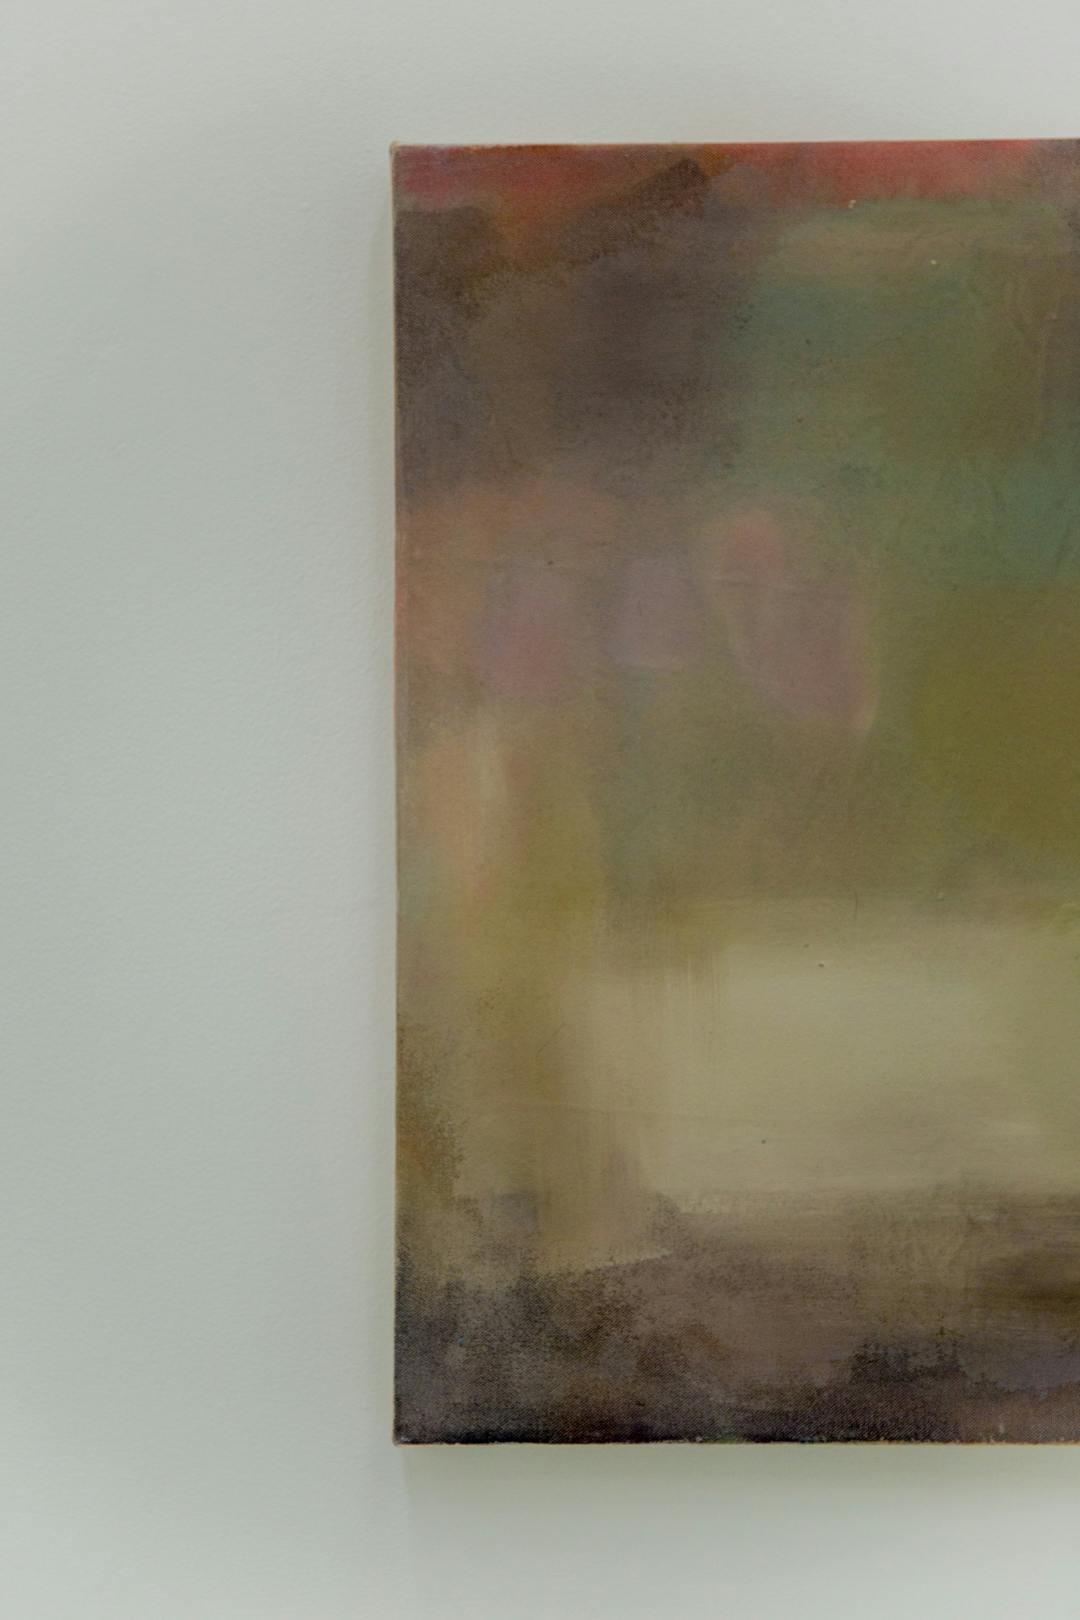 Image shows Jo Hooper's painting hanging on a wall, featuring autumnal tones and abstract painting techniques